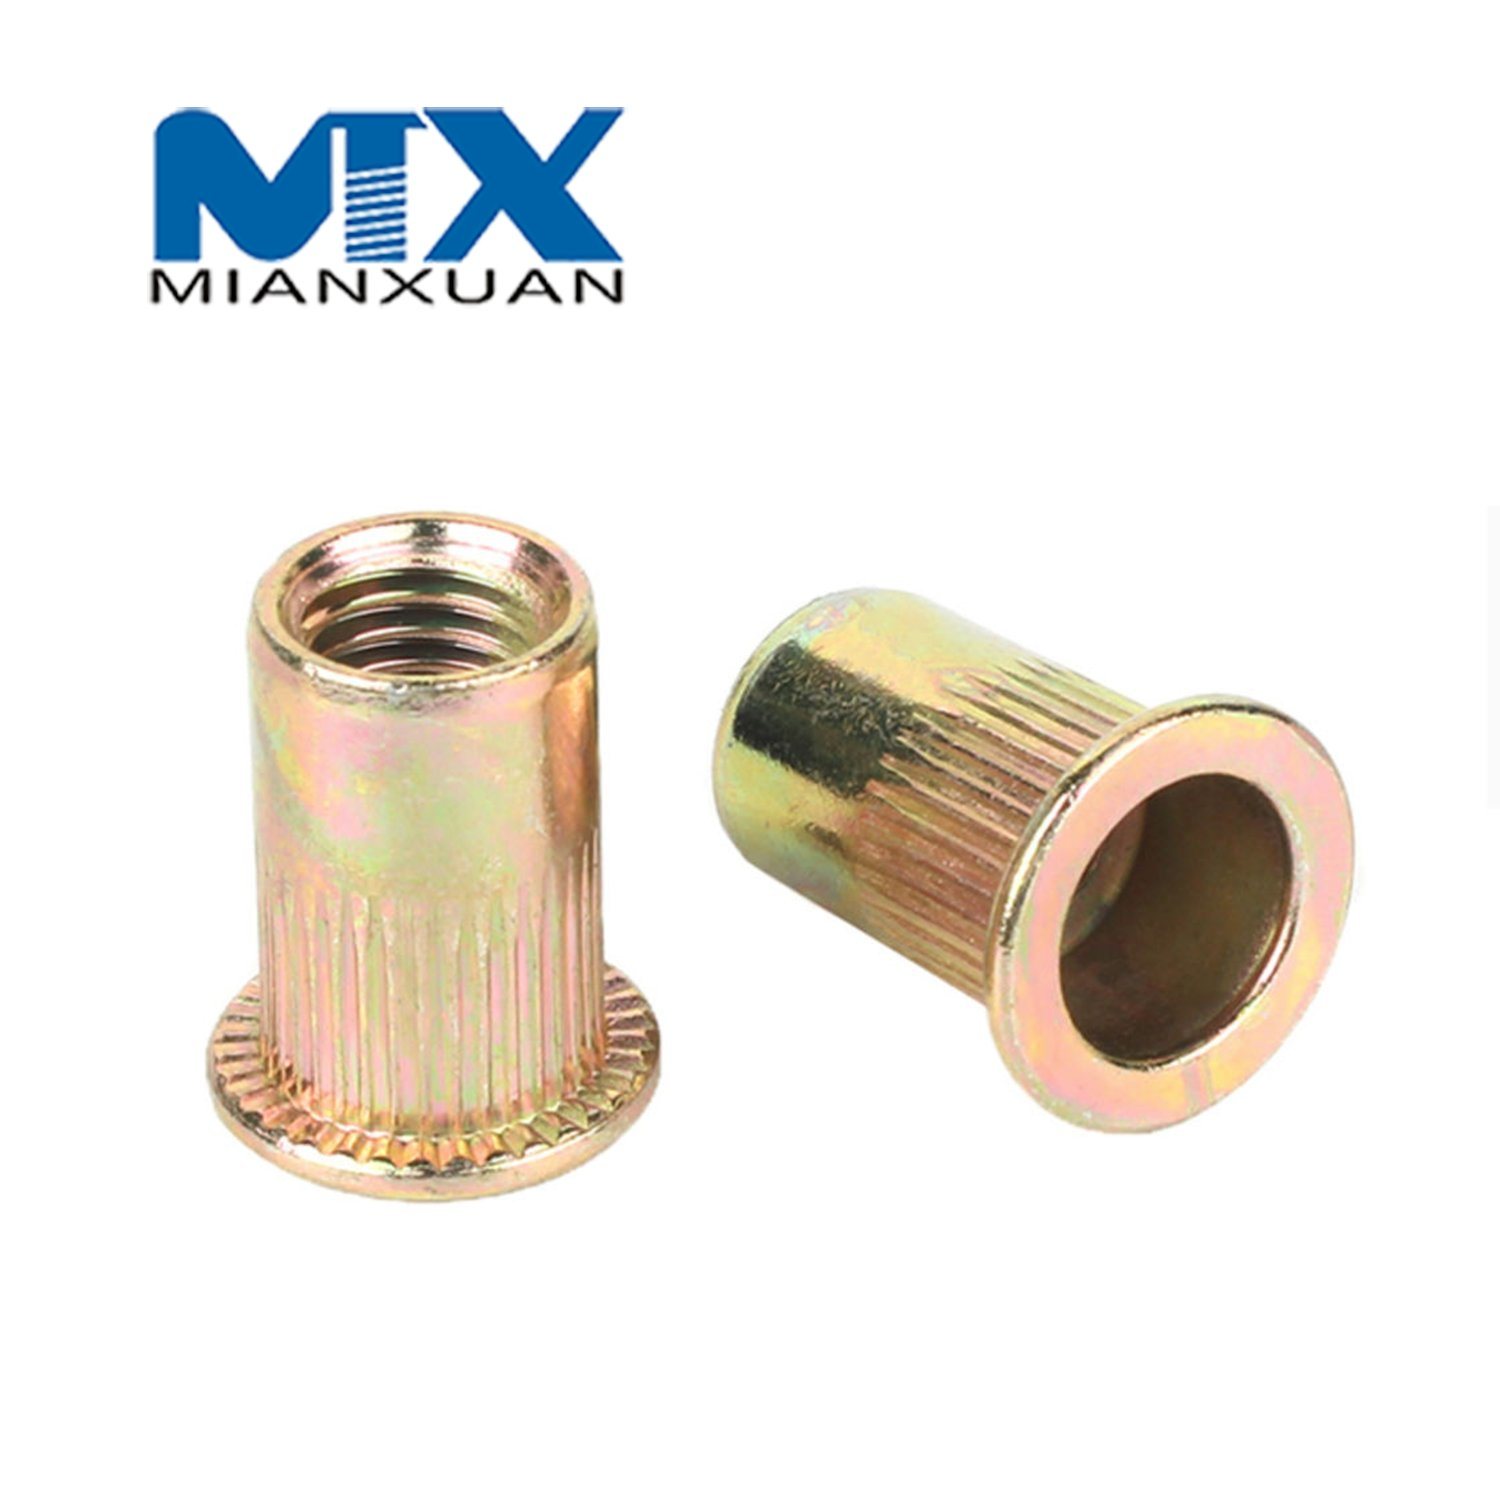 Steel Blind Insert Nut for High Quality Riveting